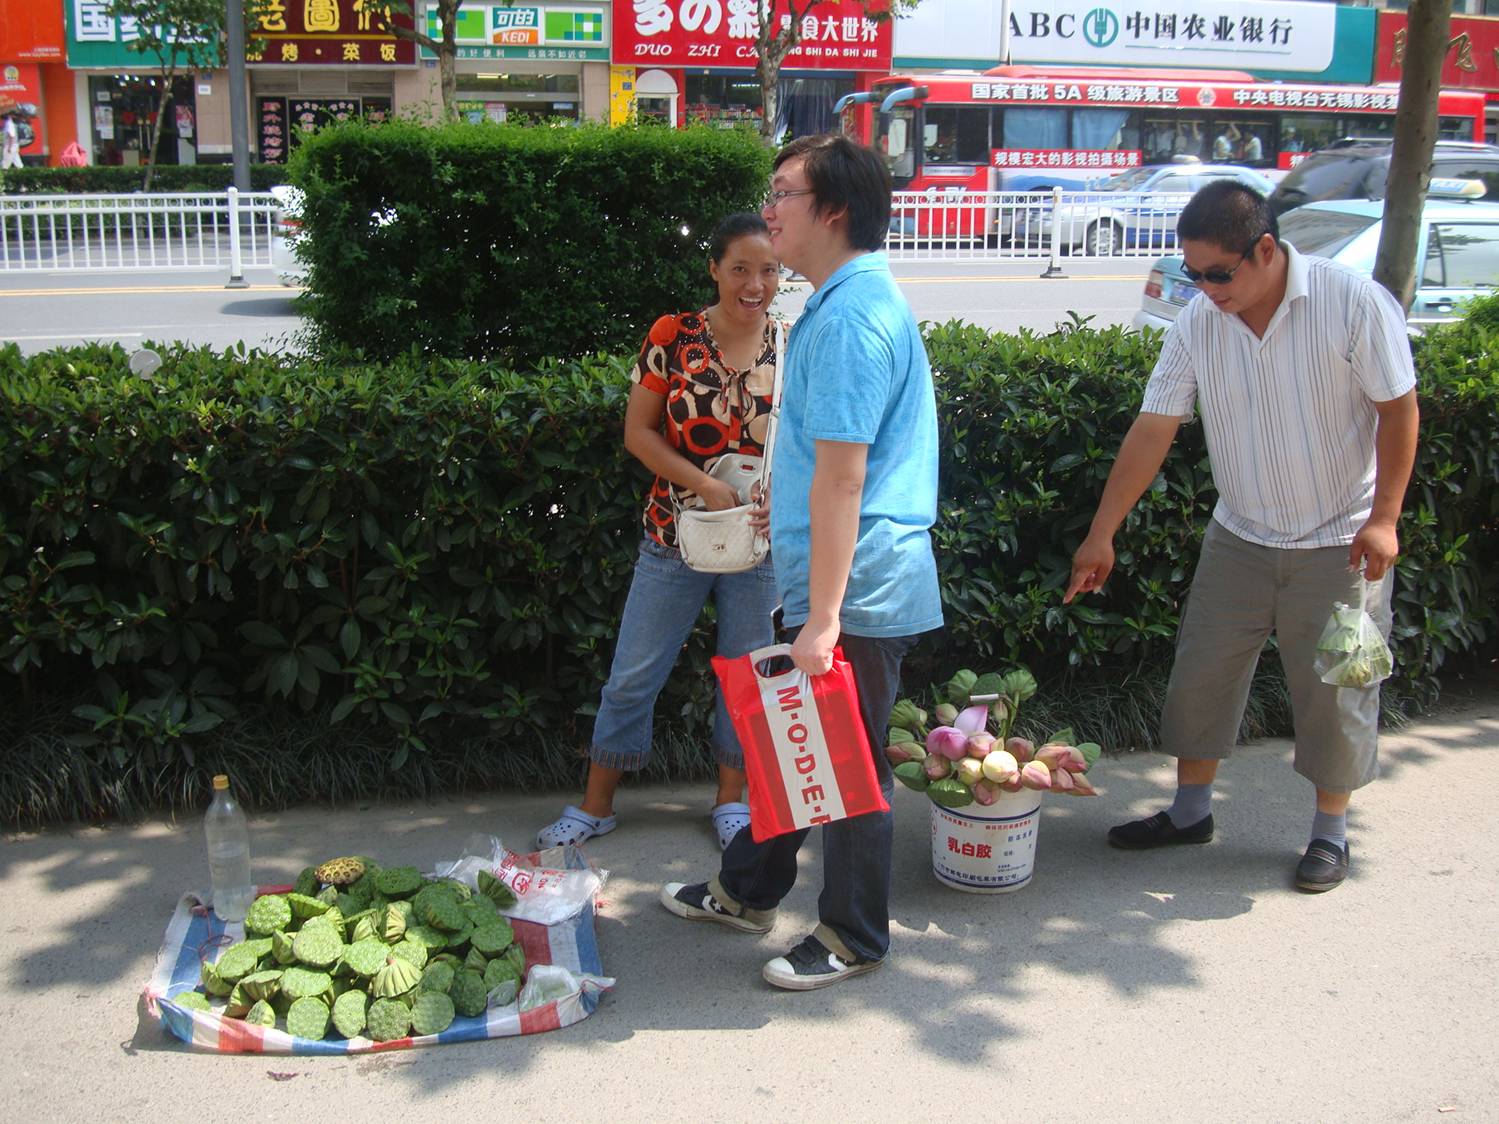 picture:  The street seller is trying to escape from the camera.  Lotus roots for sale on the streets of Wuxi, China